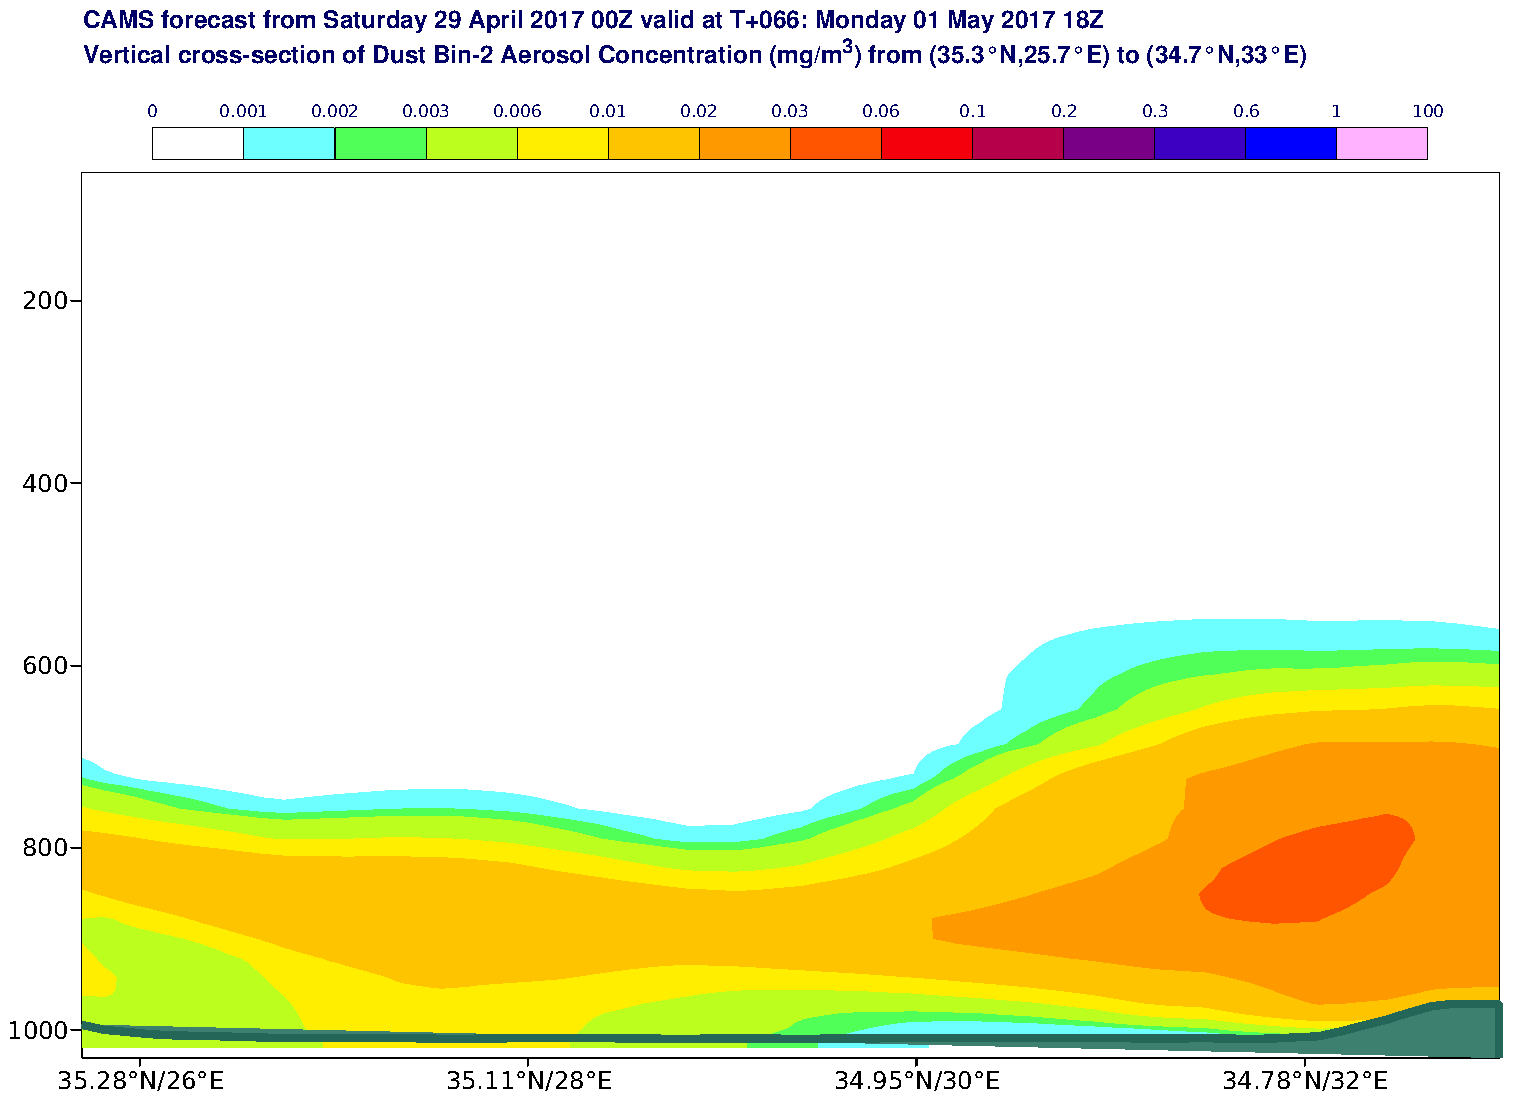 Vertical cross-section of Dust Bin-2 Aerosol Concentration (mg/m3) valid at T66 - 2017-05-01 18:00